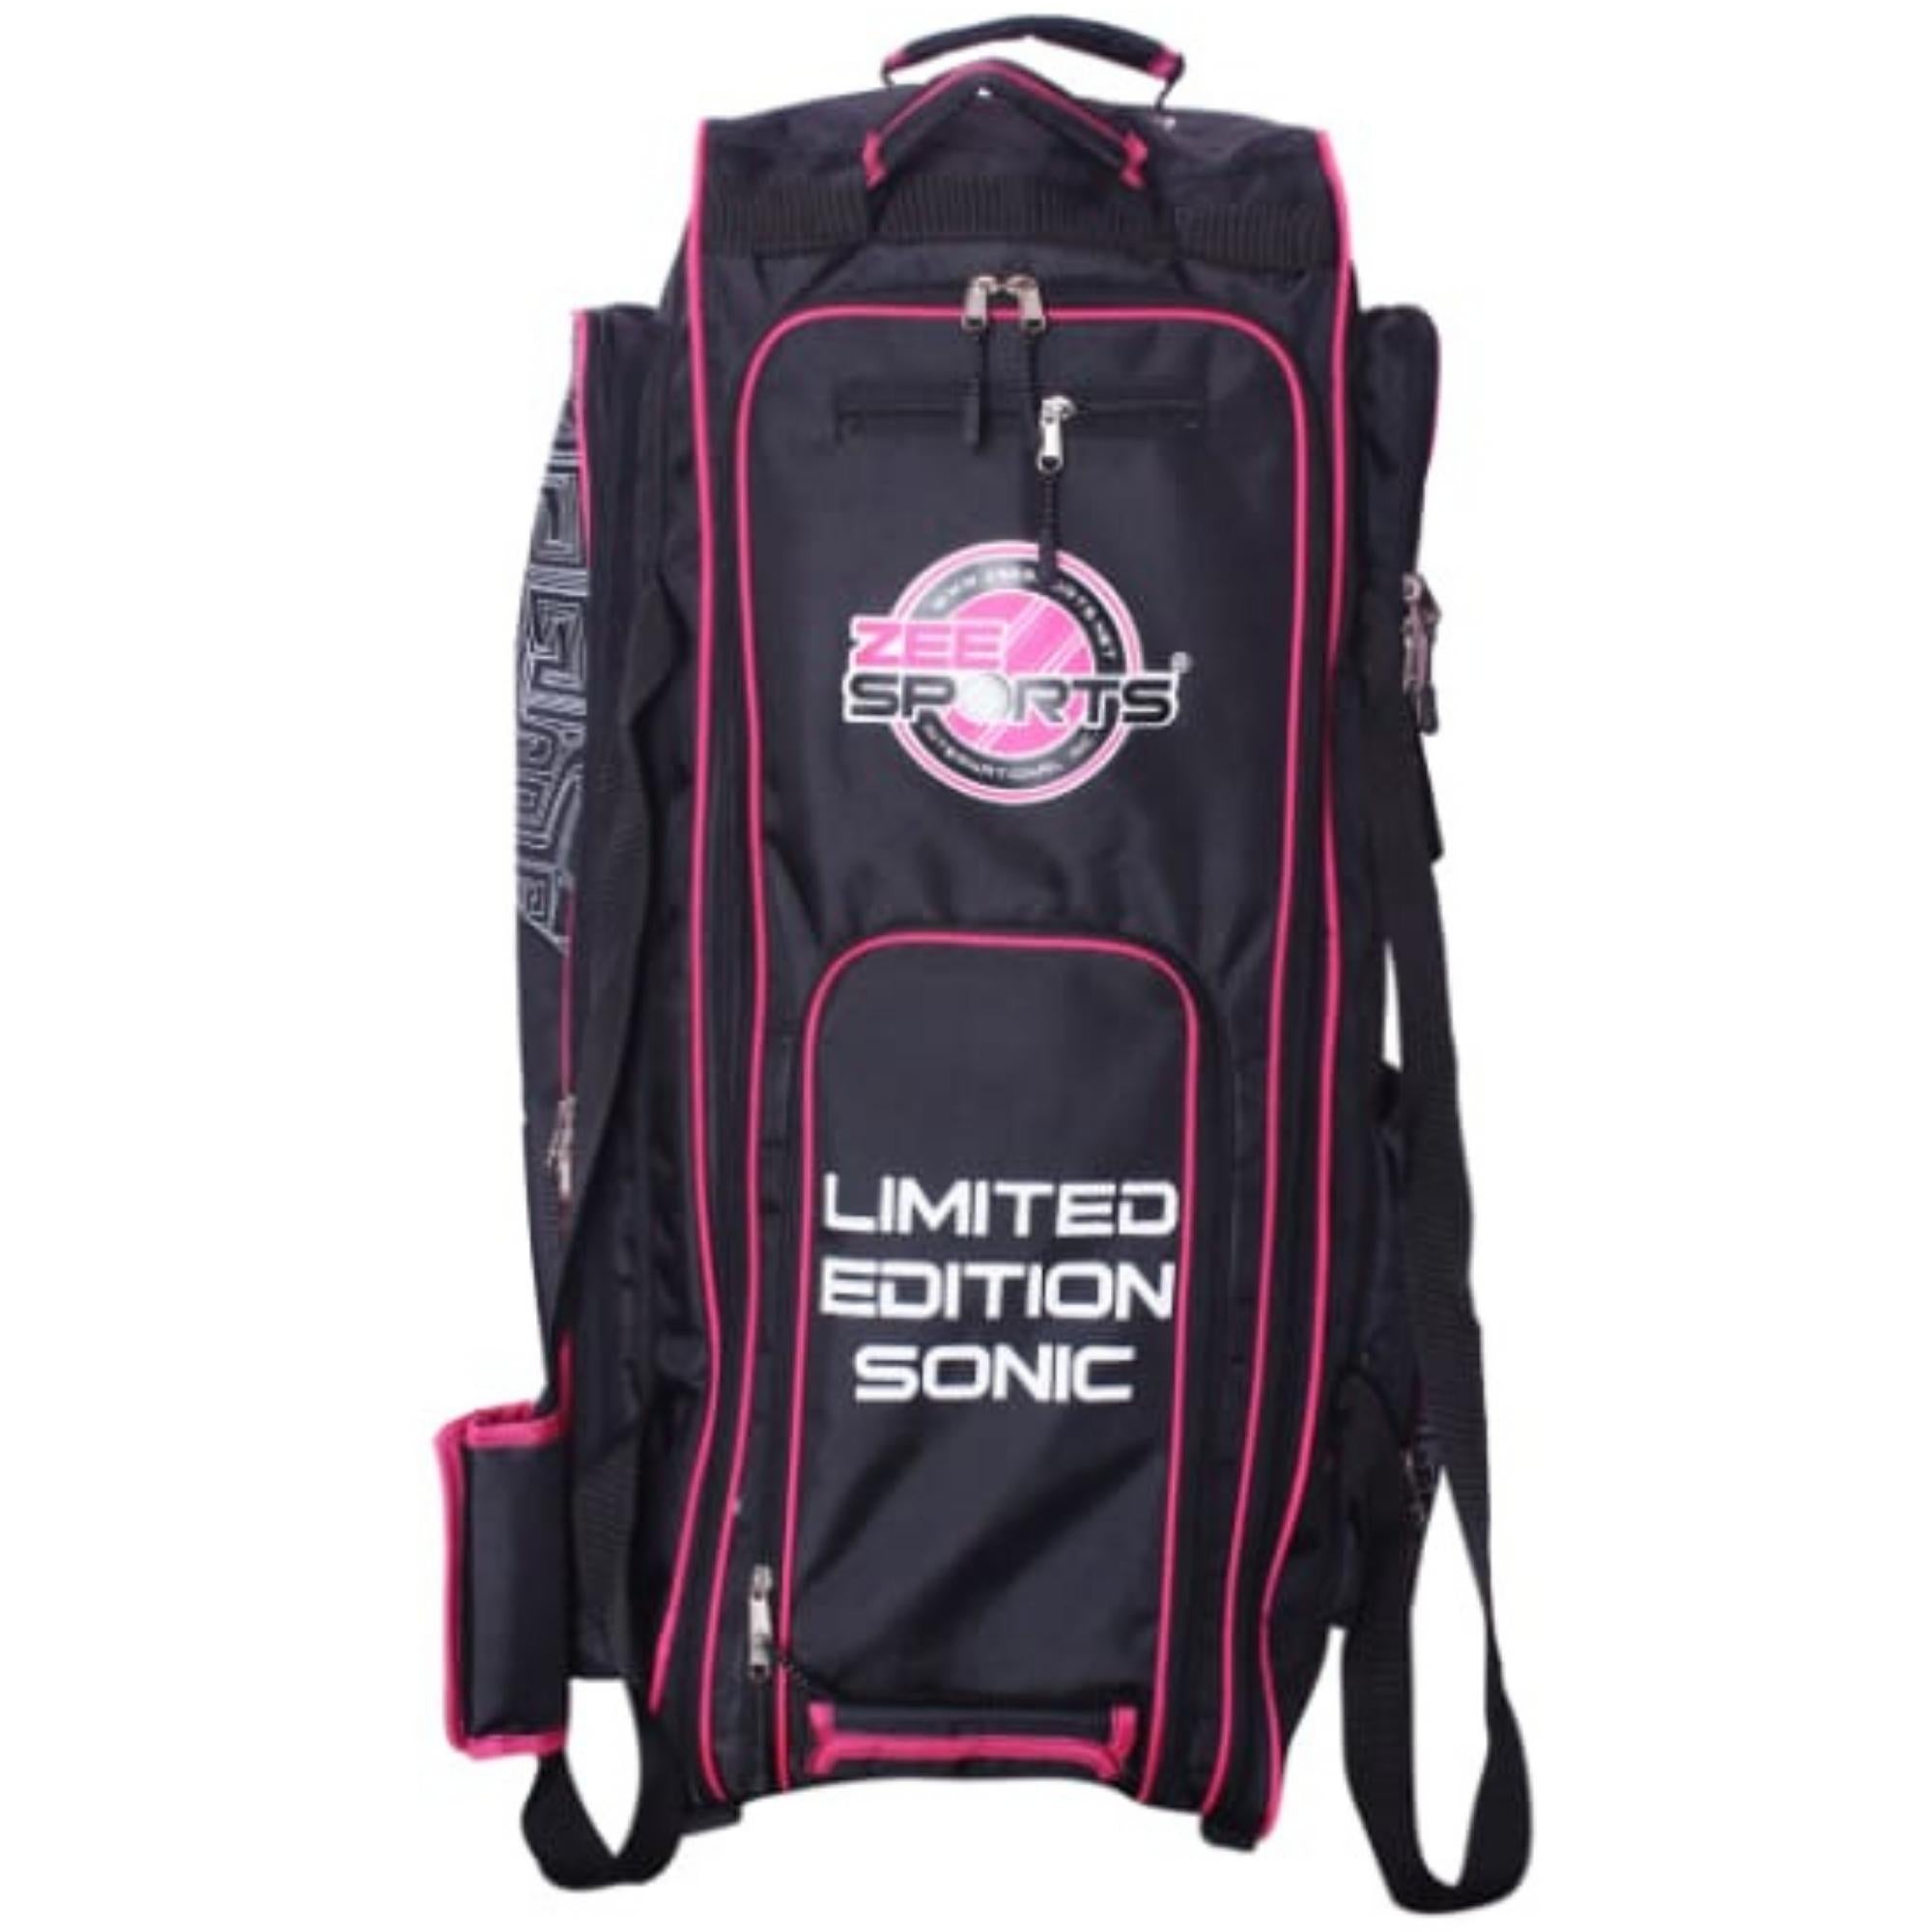 Zee Sports Kit Bag Limited Edition Sonic Black & Pink